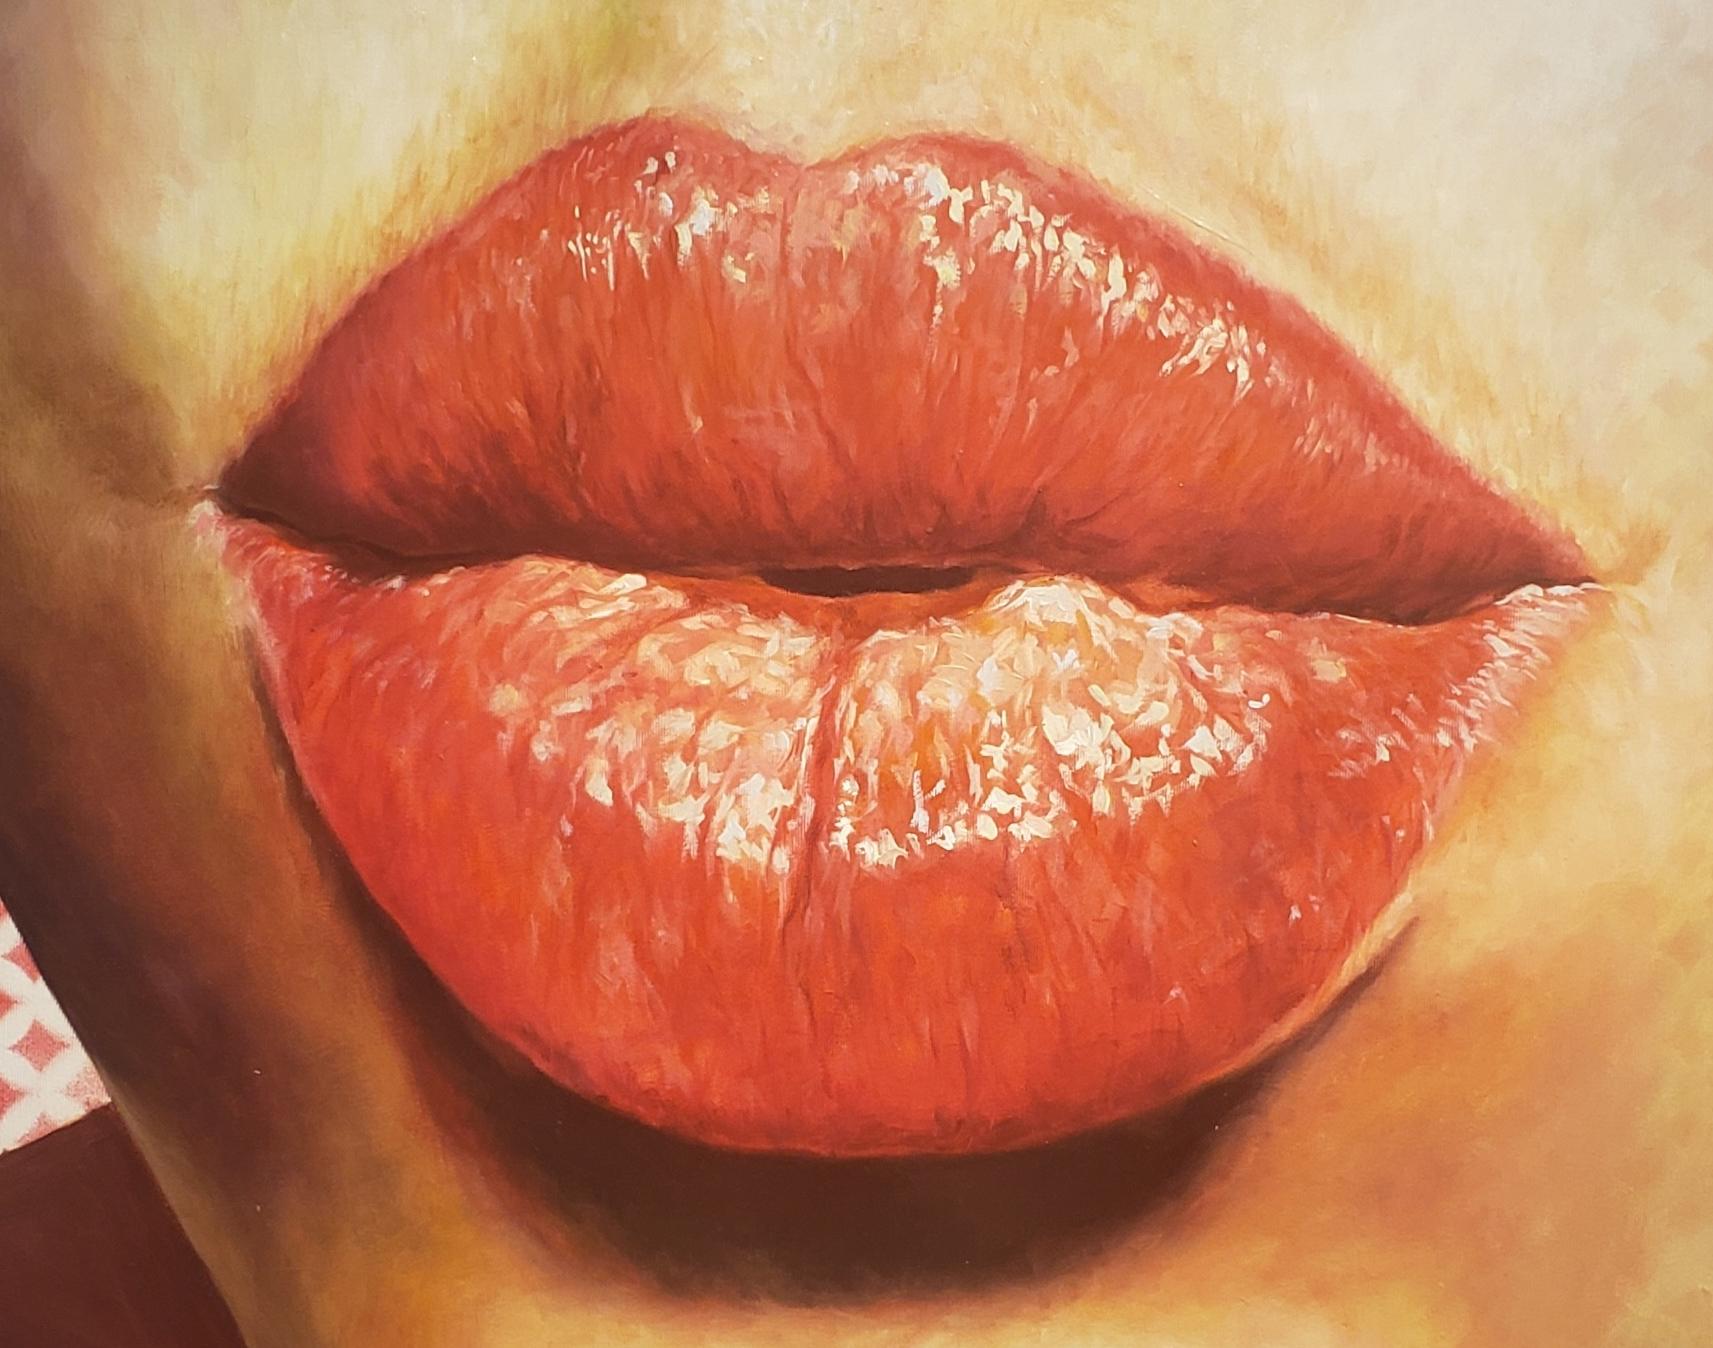 BESAME-KISS ME  is a new painting from the studio of Cuban artist Cristian Mesa Velazquez. Kiss Me is  an oil painting done in the Realist Style of contemporary painting which is oil on canvas.  Cristian Mesa Velazquez is known for his figurative